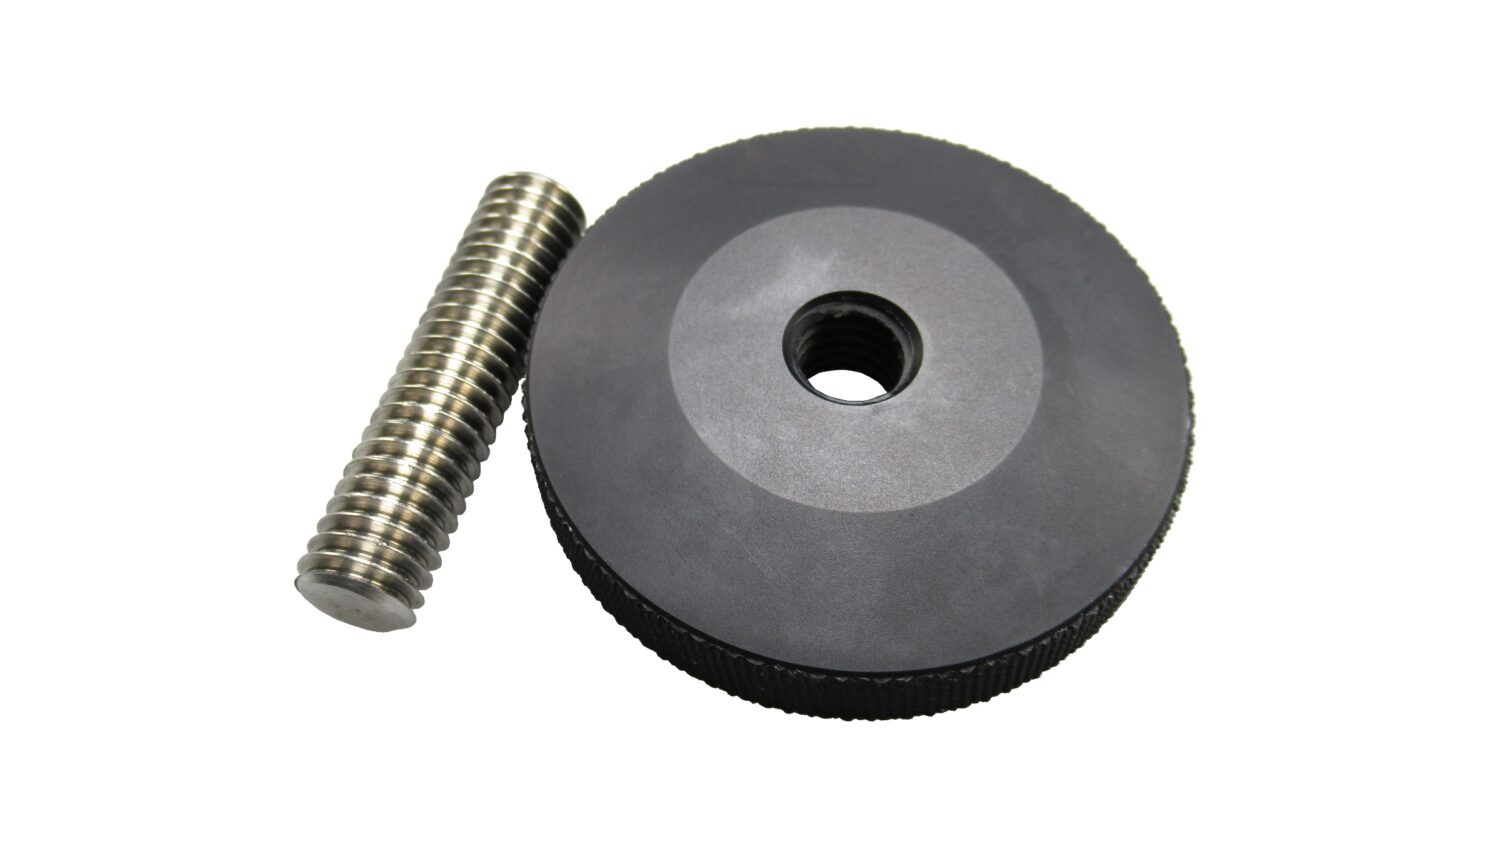 FOBA round plate with removable stub screw useful with combitube